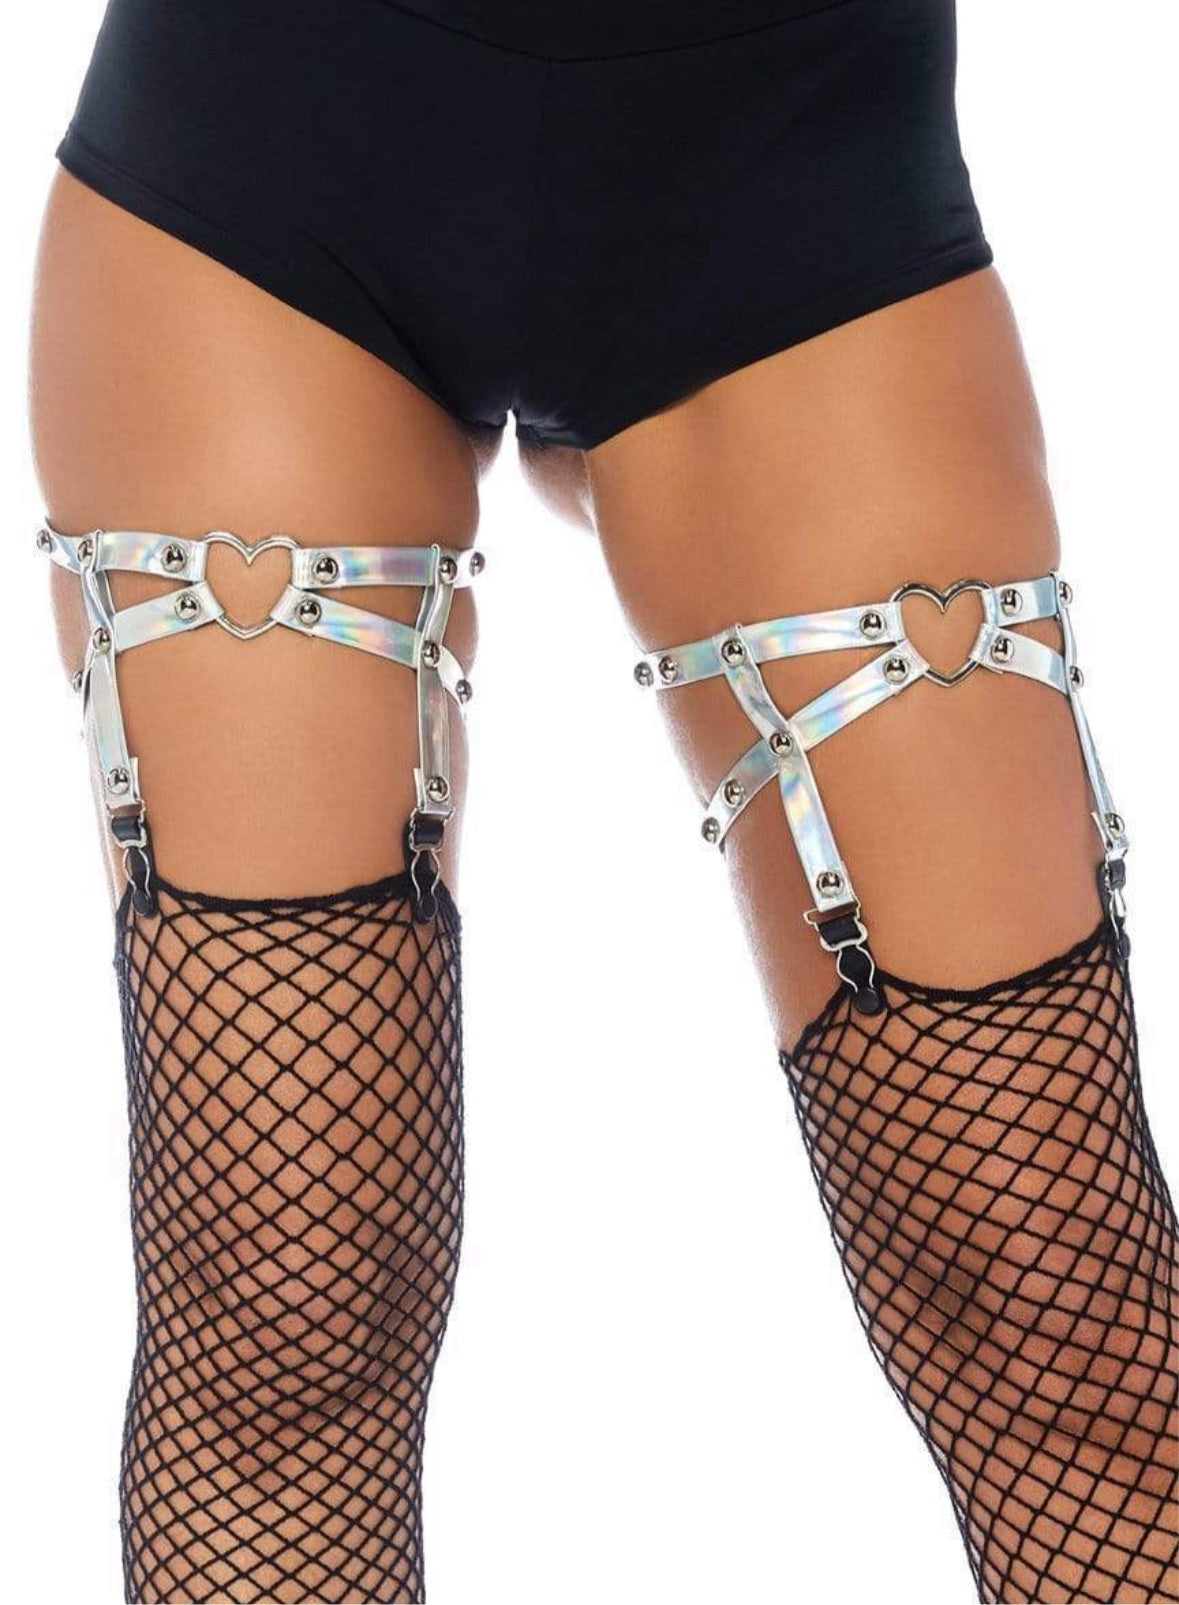 Holographic Stud Thigh High Heart Garder